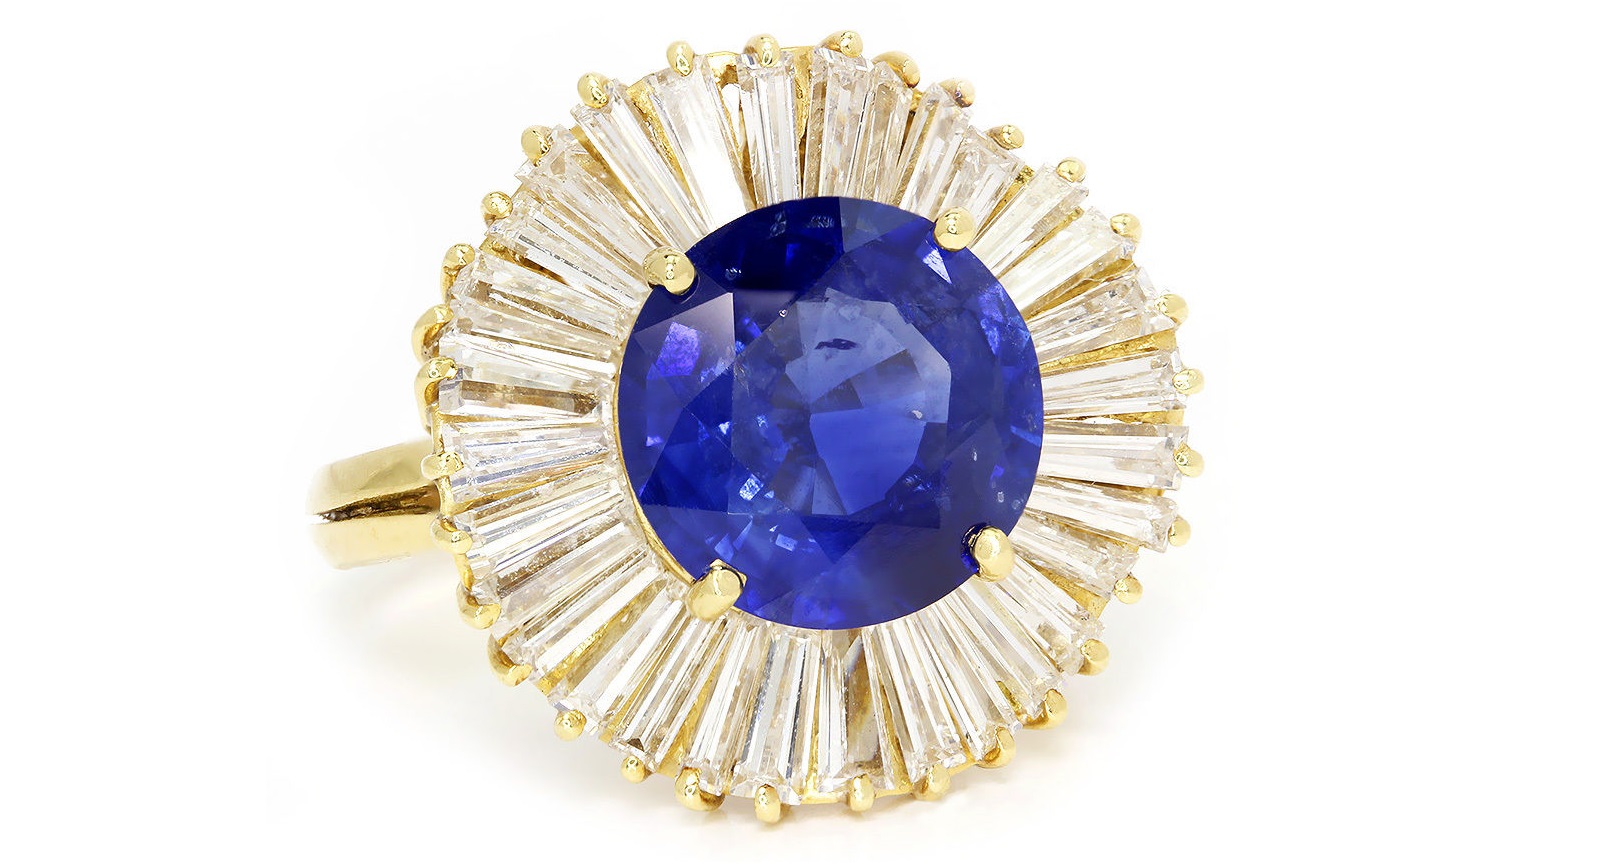 Vintage Sapphire Ballerina Ring with Diamonds 18K Yellow Gold 5.22ctw Certified